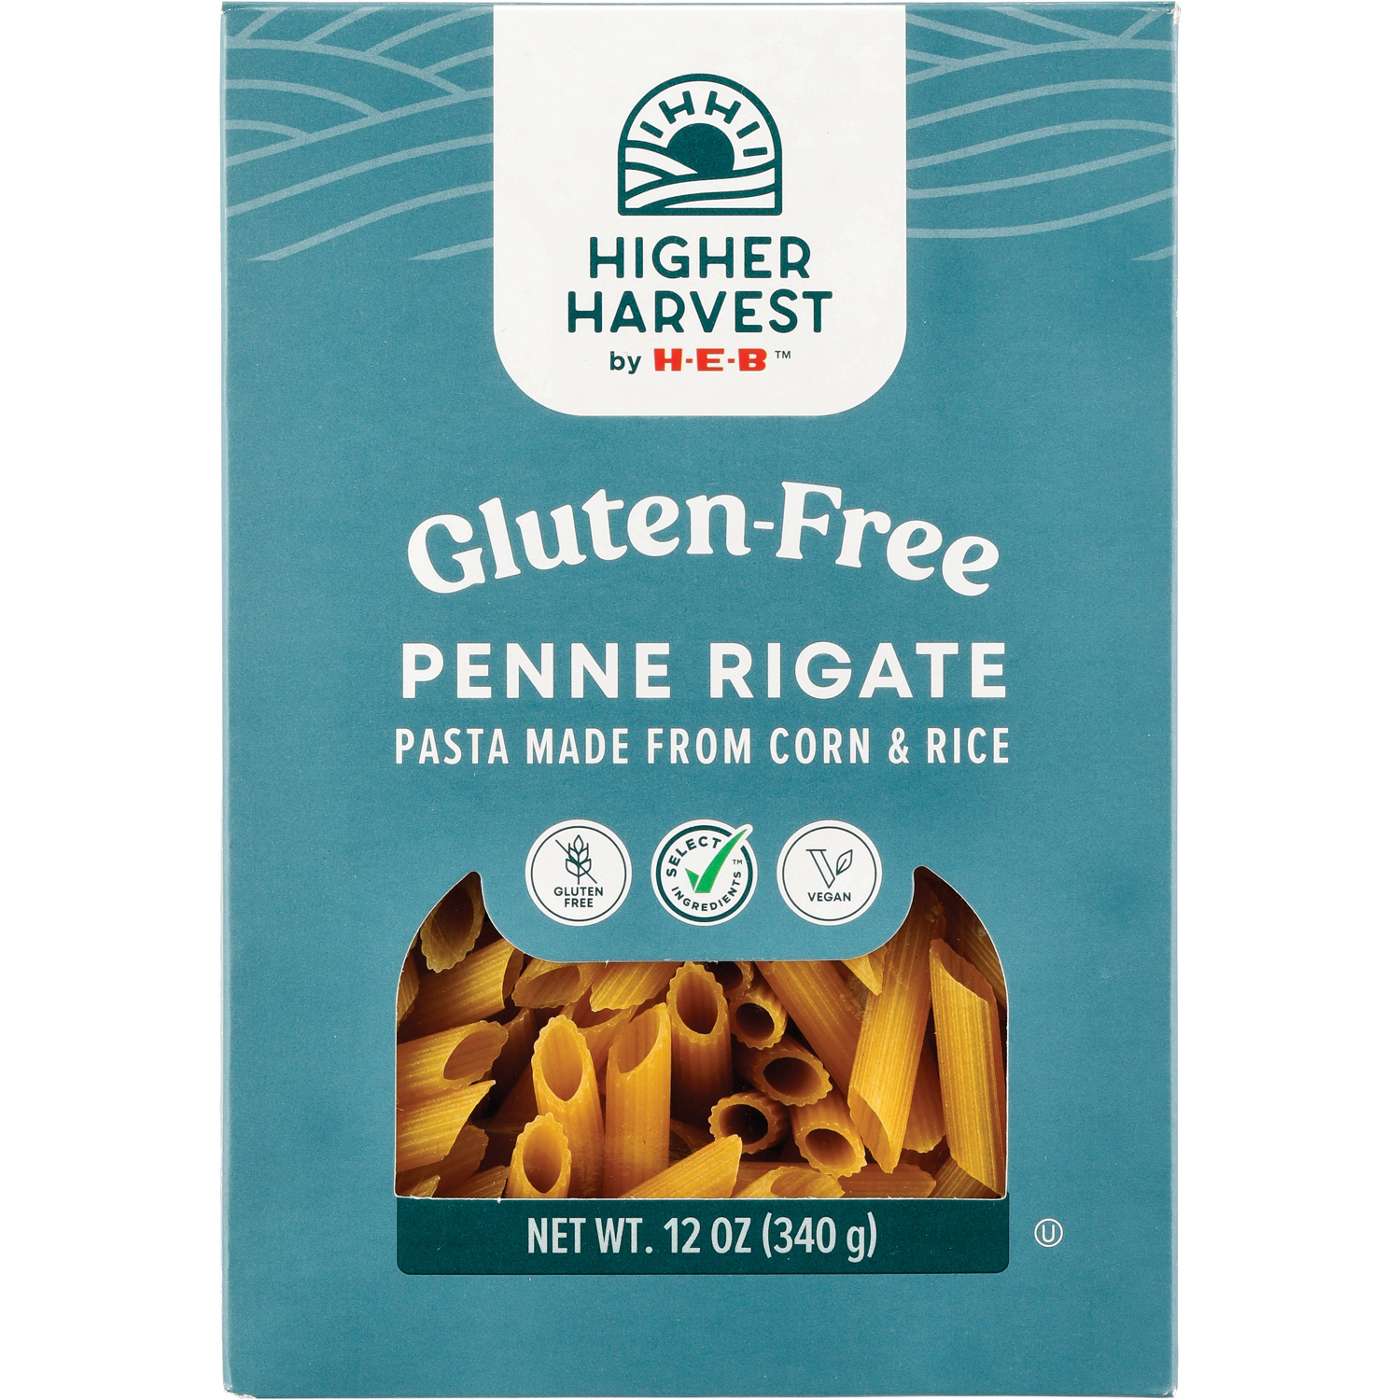 Higher Harvest by H-E-B Gluten-Free Penne Rigate Pasta Noodles; image 1 of 3